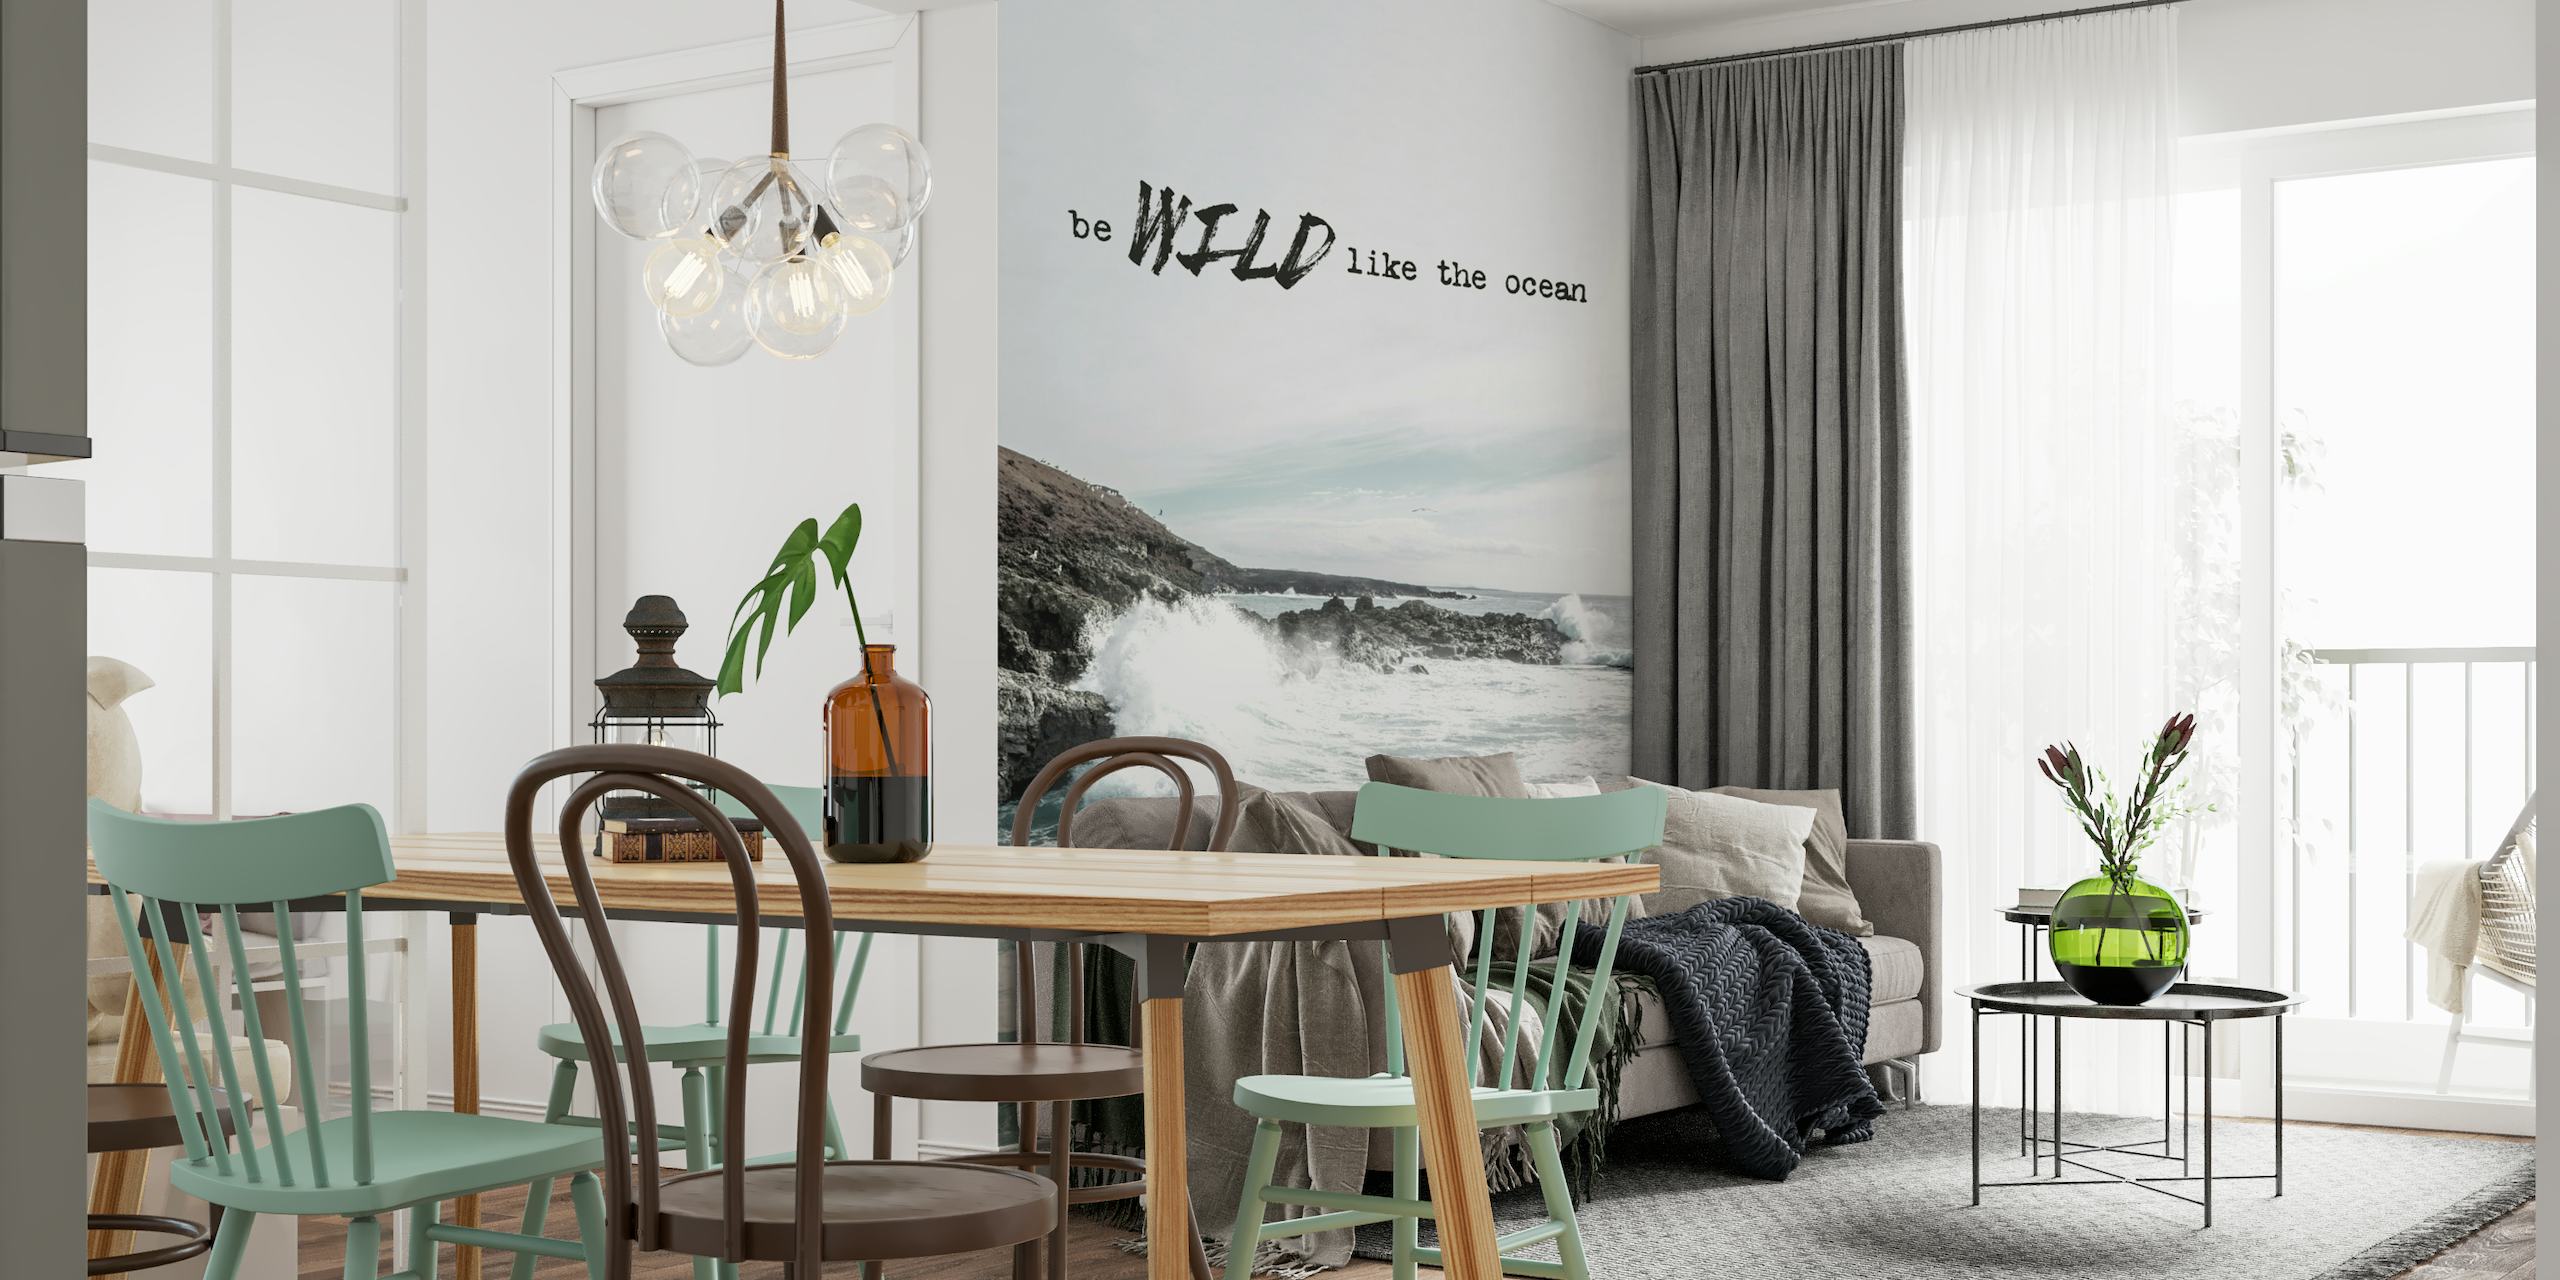 Ocean wall mural with crashing waves and rocky cliffs with the text 'be WILD like the ocean'